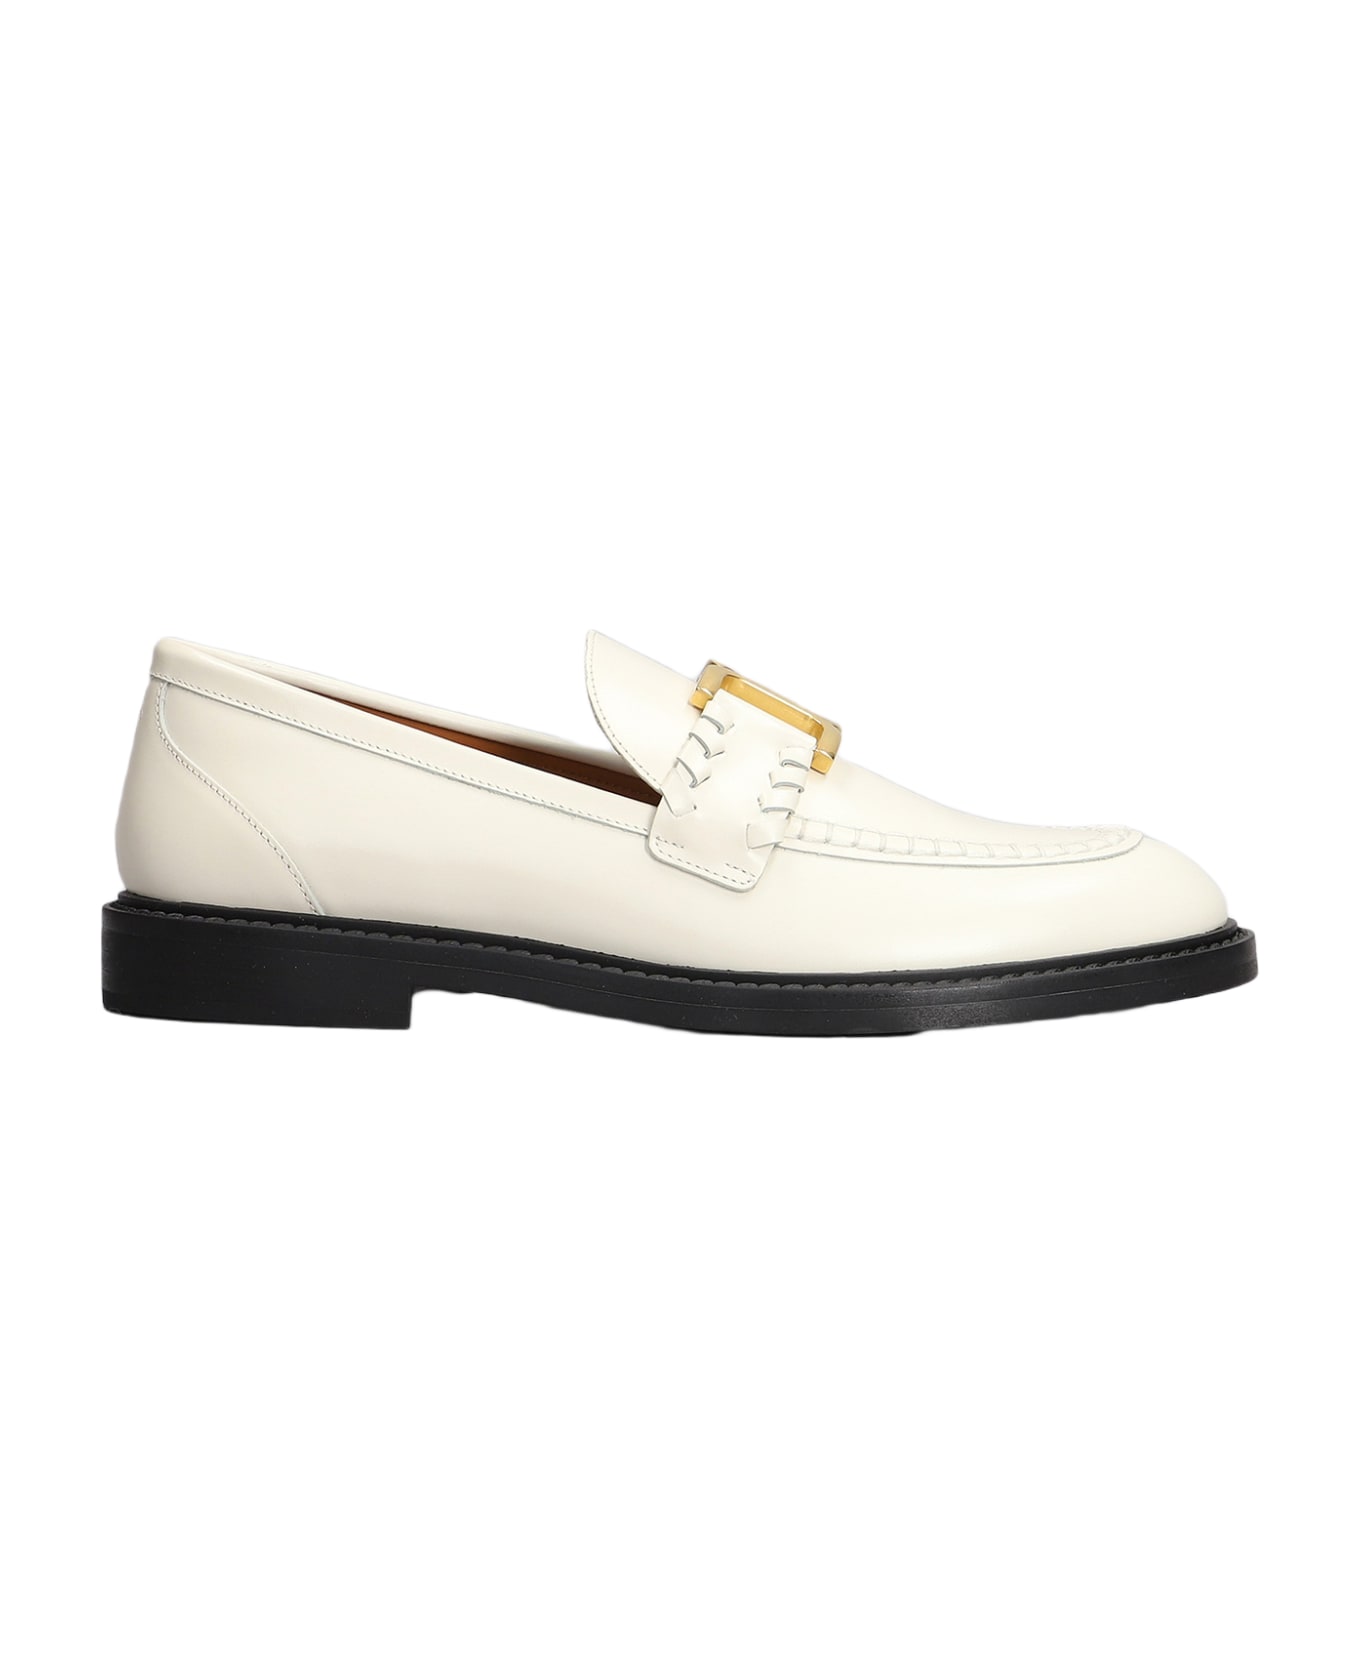 Chloé Mercie Loafers In White Leather - white